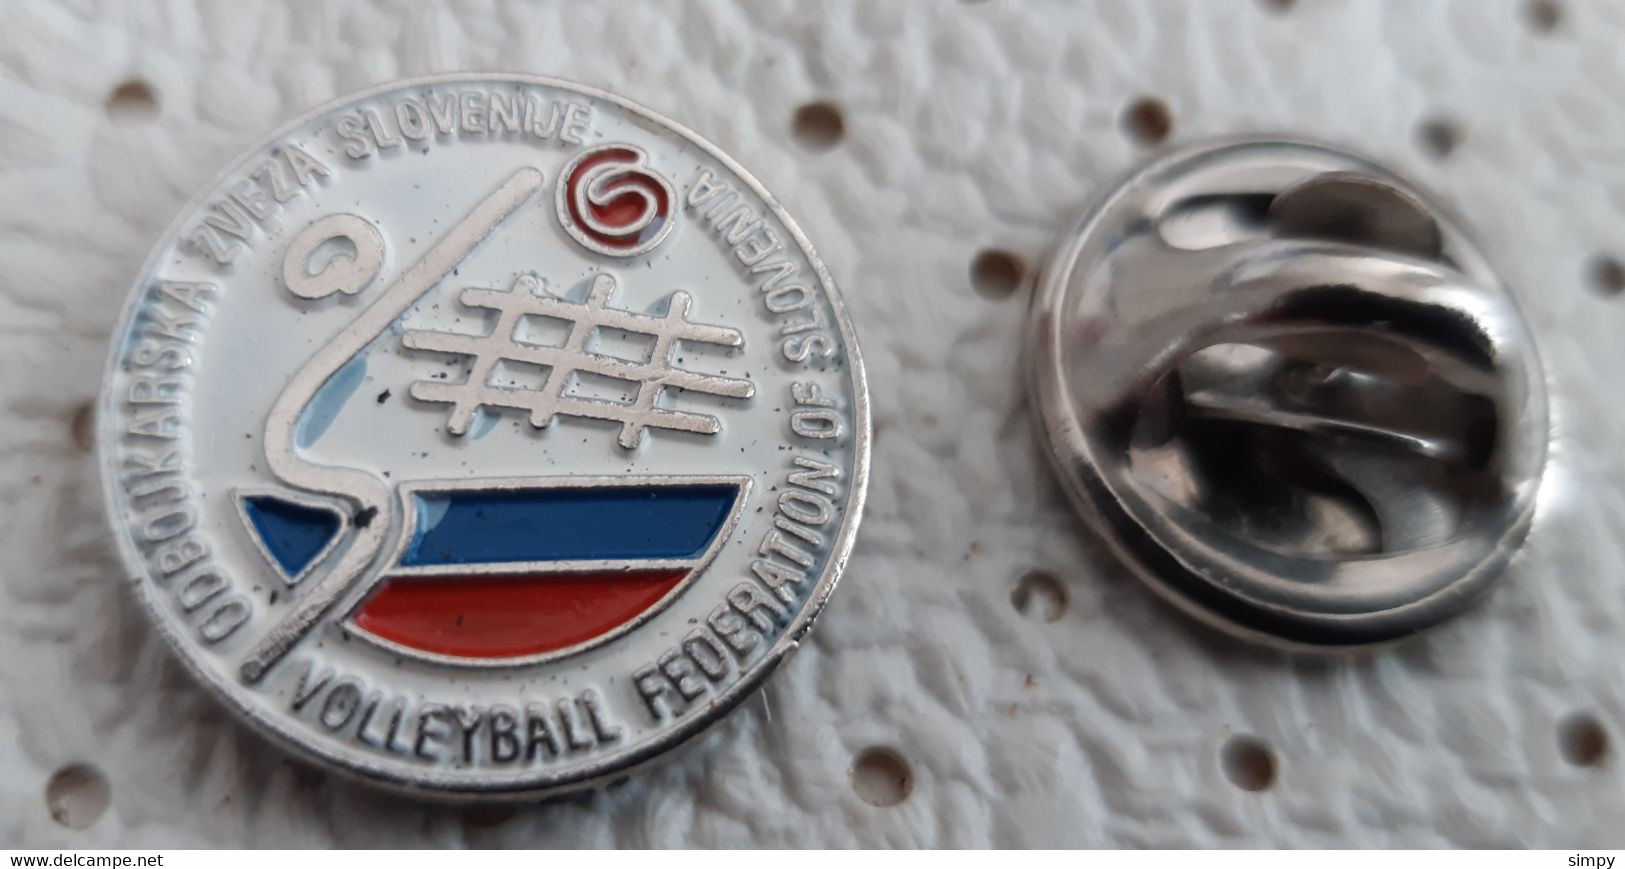 SLOVENIA Volleyball Federation Pin Badge - Volleyball